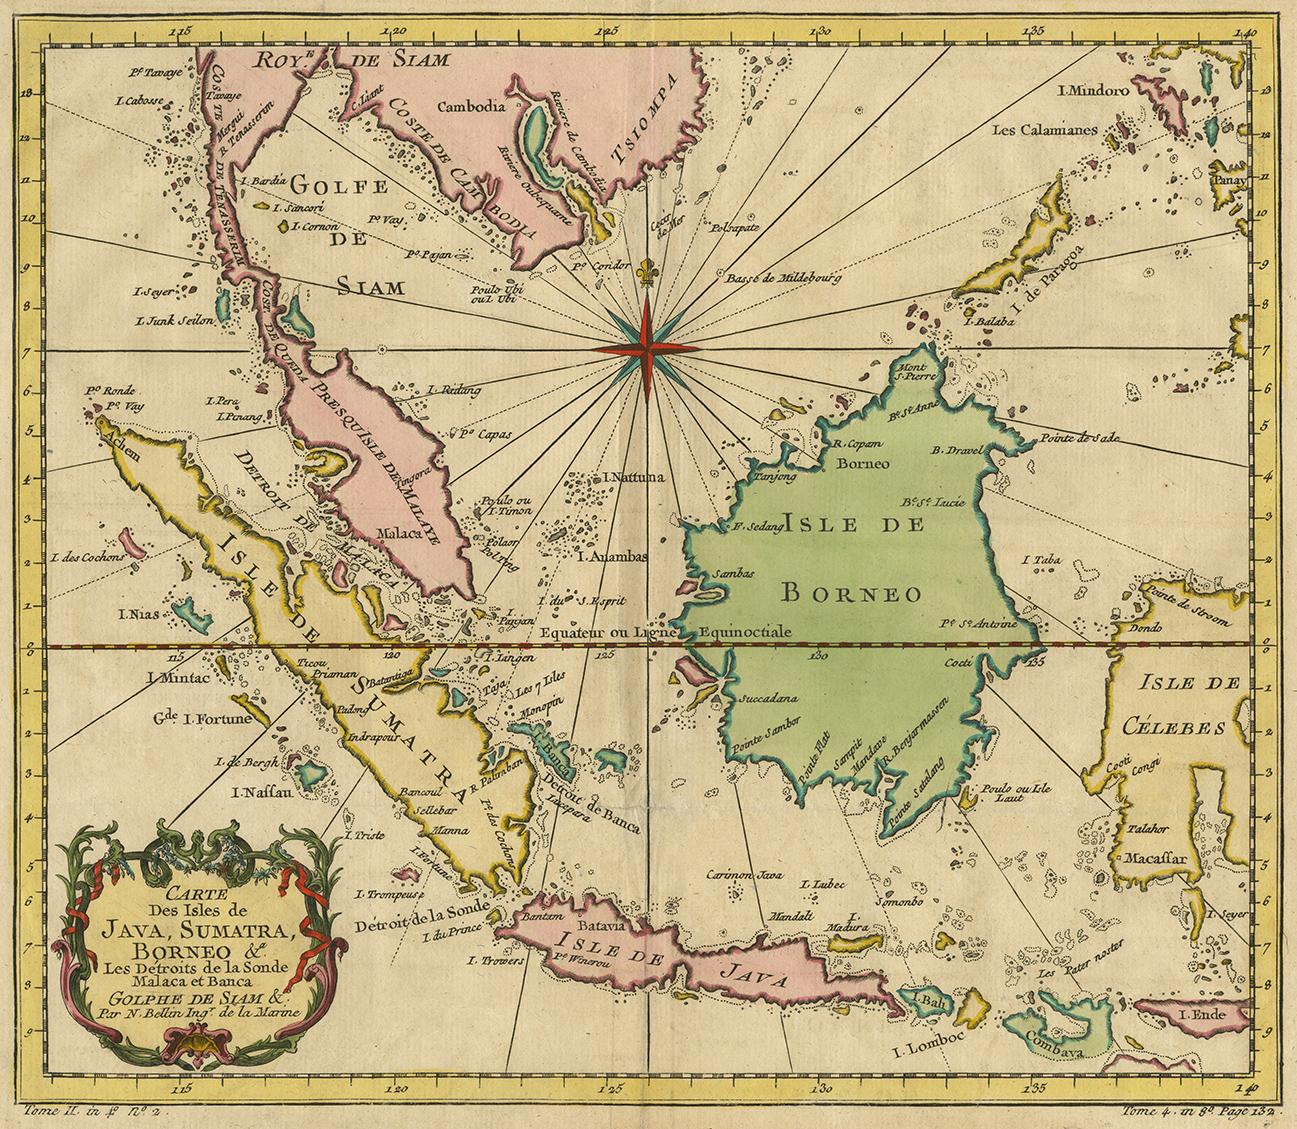 This is an attractive circa 1757 map of the East Indies by Bellin. The map covers from Siam or modern day Vietnam south to include the western portion of the Lesser Sunda Islands. Depicts the islands of Malay (Malacca), Singapore, Borneo, Sumatra,